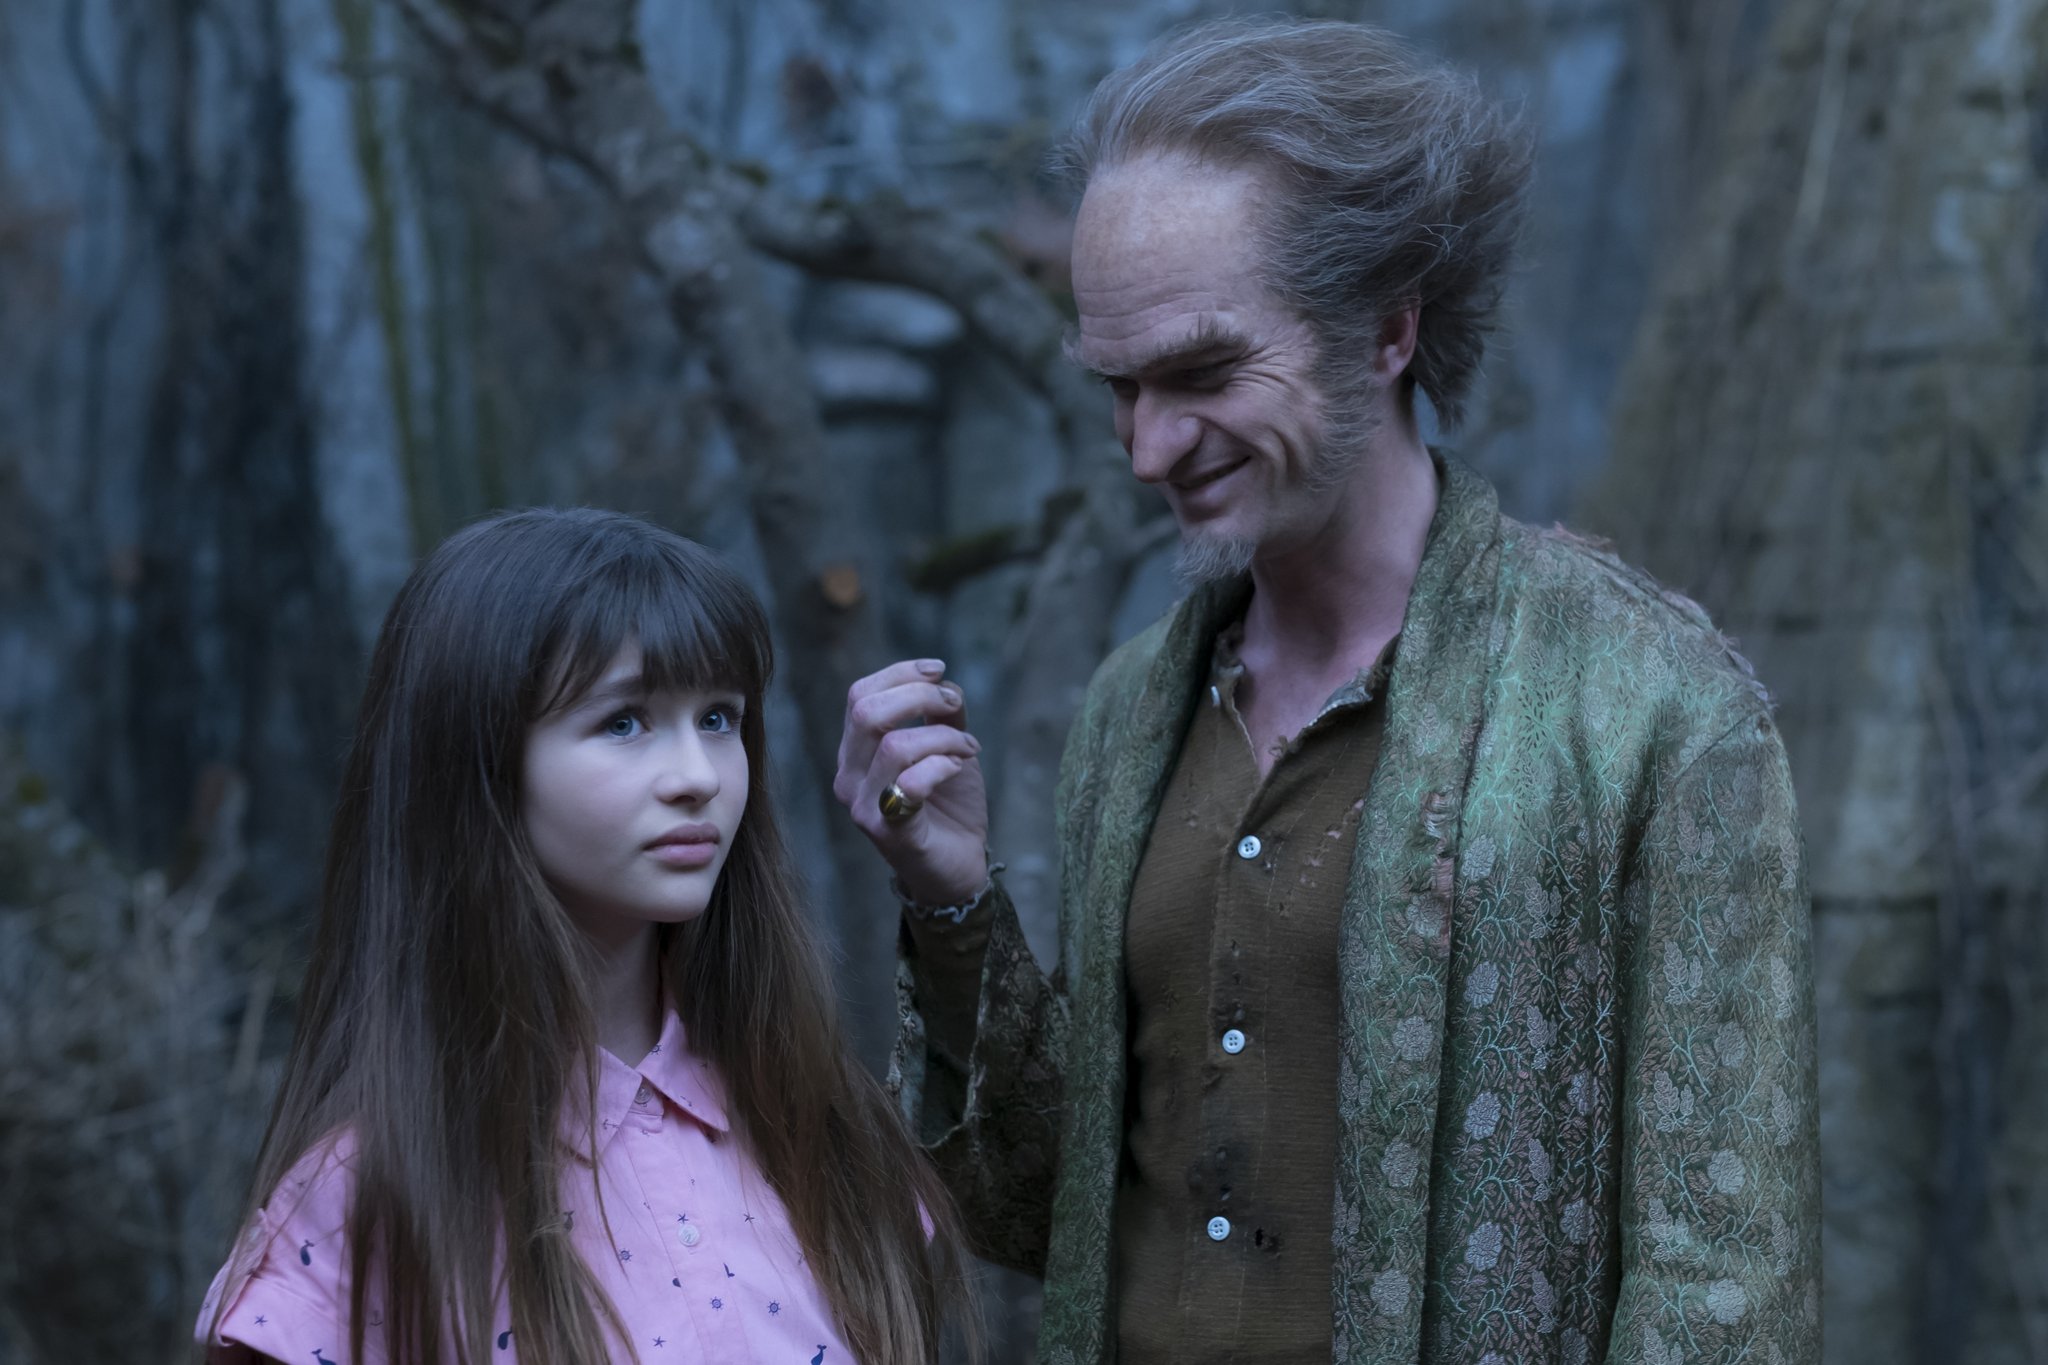 %image_alt% - A Series Of Unfortunate Events Season 1 Easter Eggs